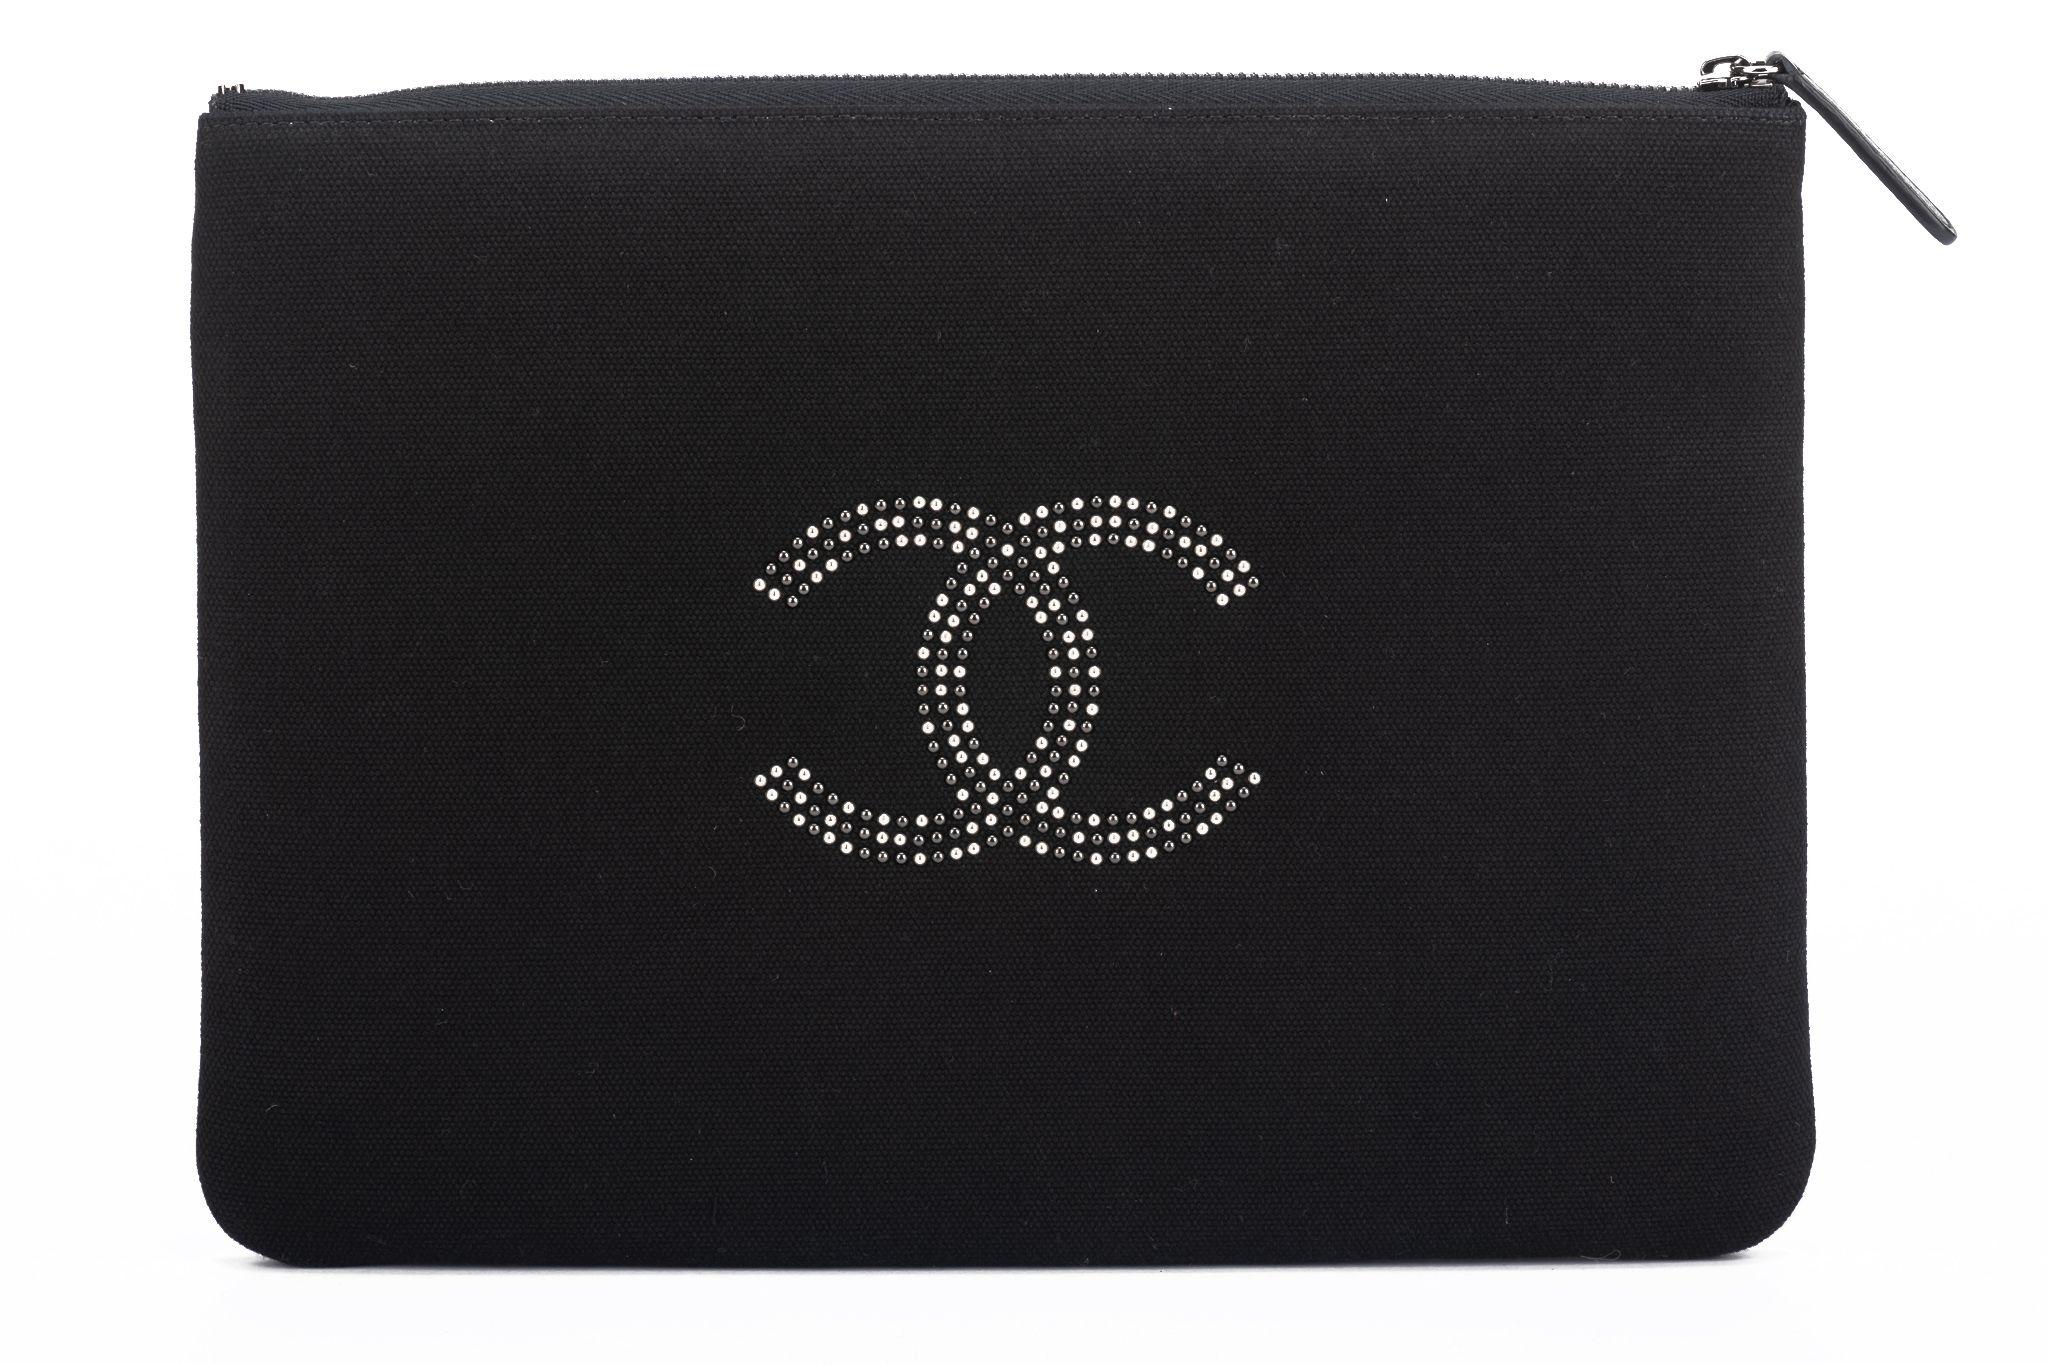 Chanel BNIB Studded Black Silver Clutch In New Condition For Sale In West Hollywood, CA